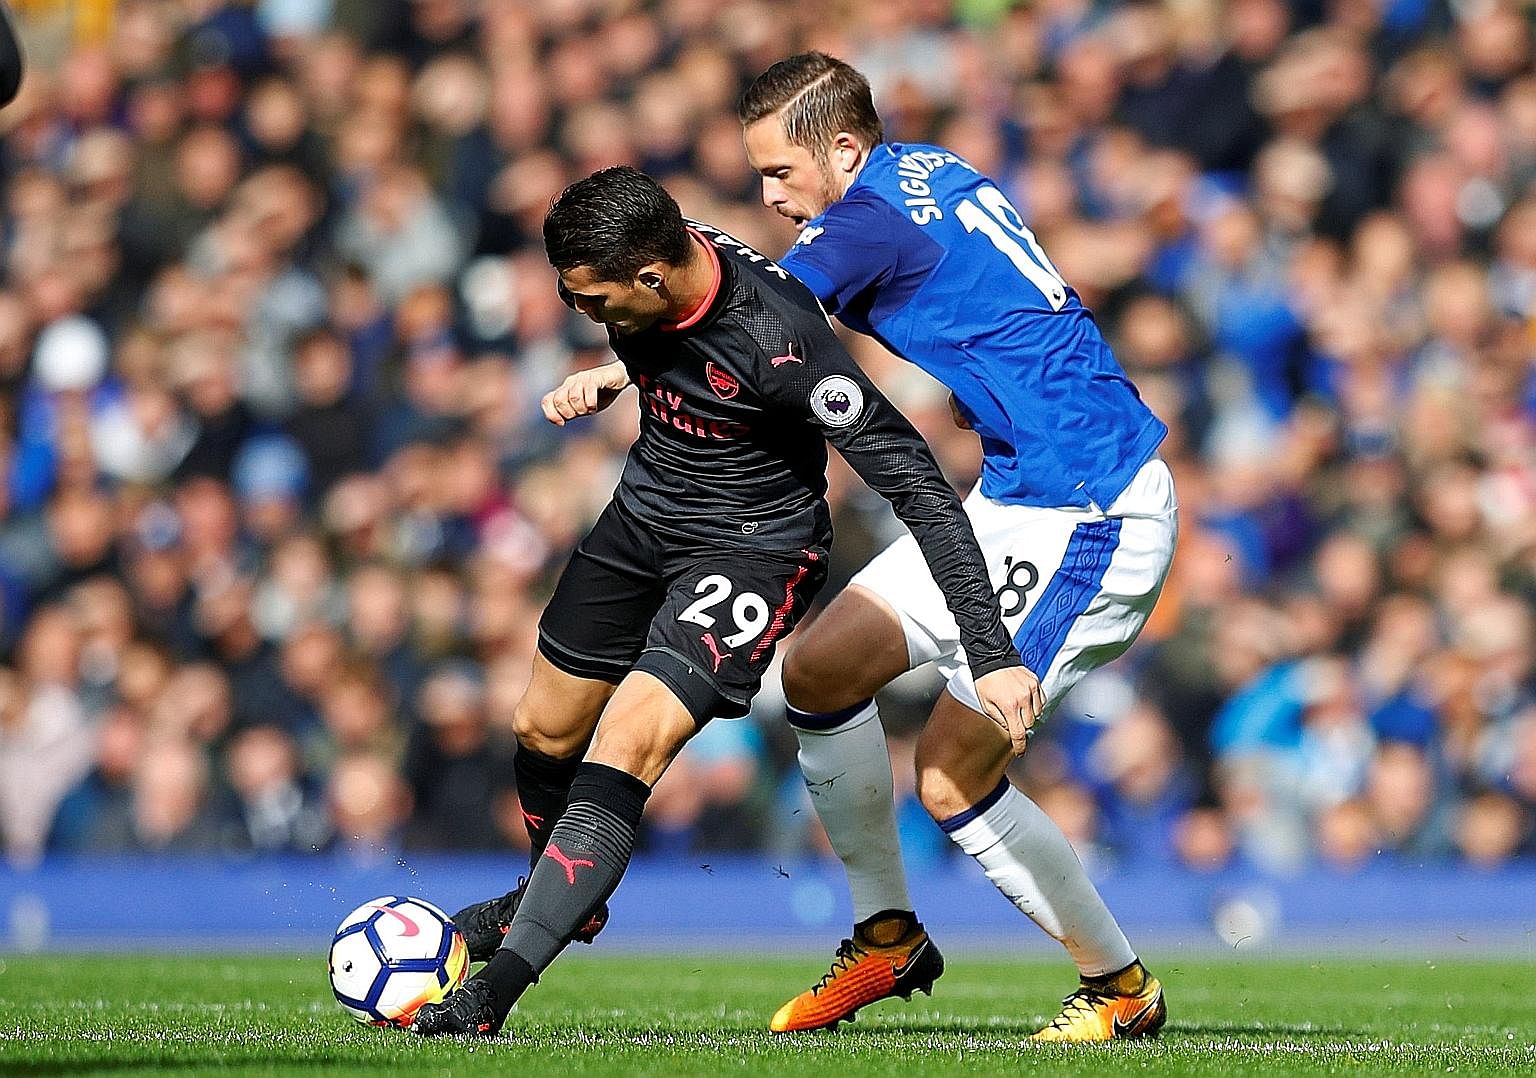 Arsenal's Granit Xhaka outsmarting Everton's Gylfi Sigurdsson during their Premier League encounter last Sunday. The Iceland midfielder, recruited from Swansea City in August, received praise from Ronald Koeman despite below-par performances.